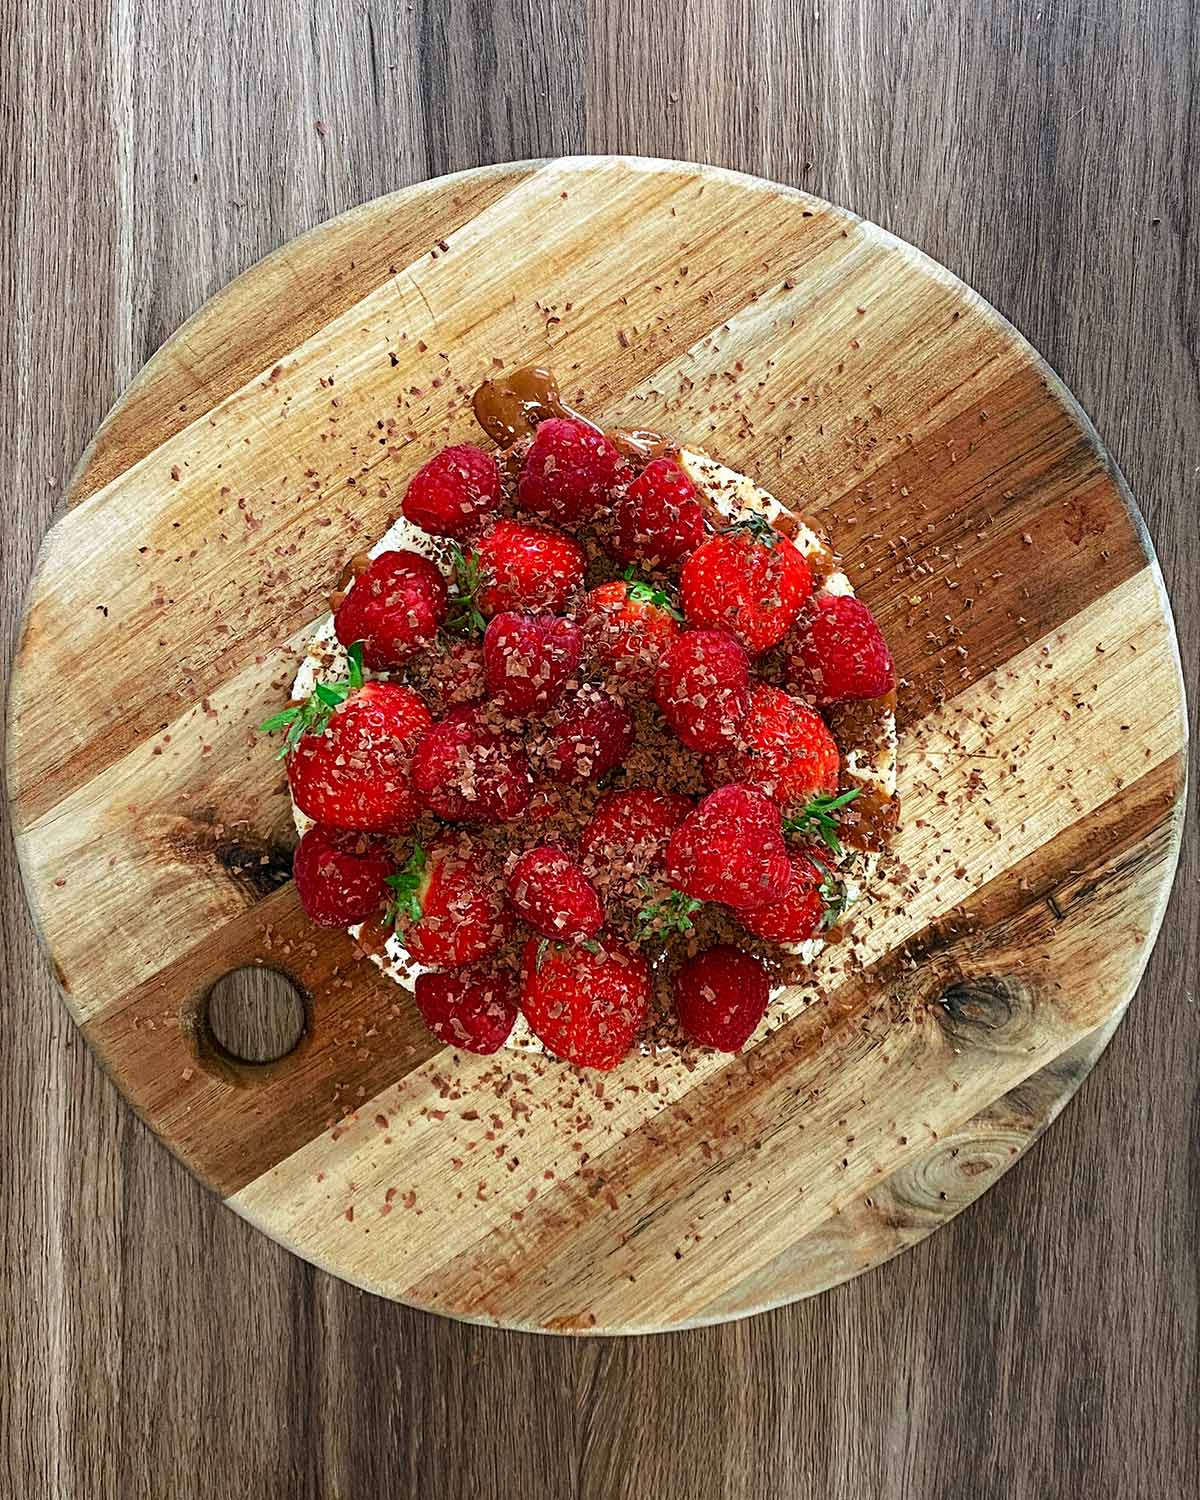 Grated chocolate sprinkled over the berries.